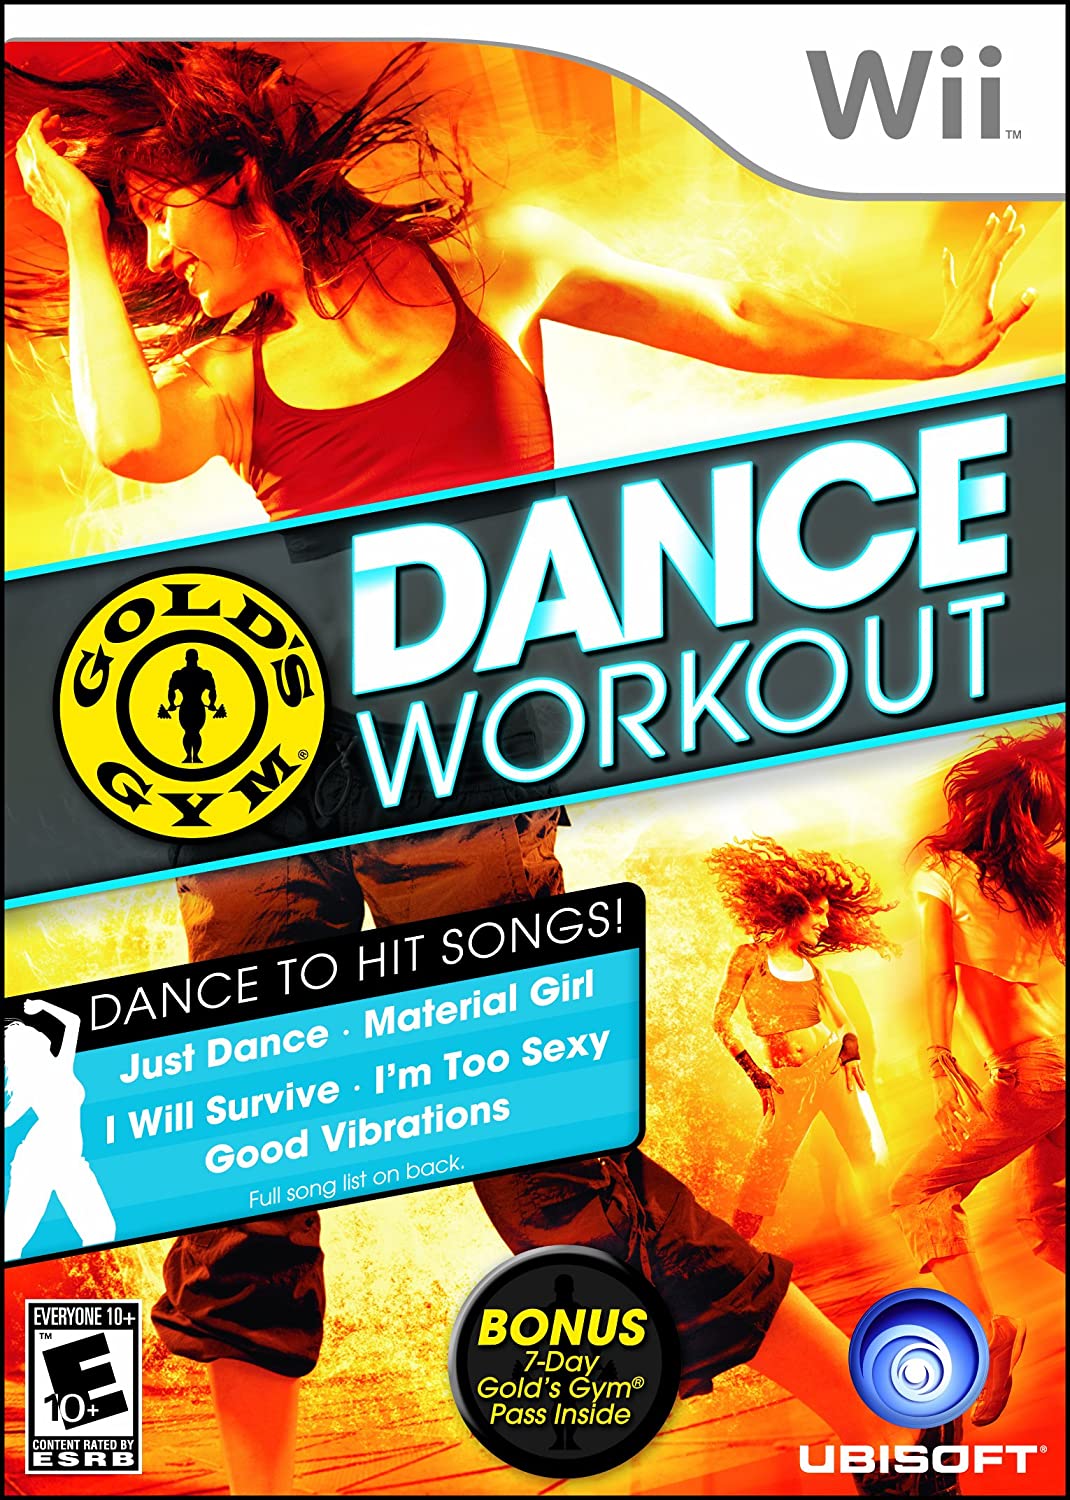 Gold’s Gym: Dance Workout player count stats